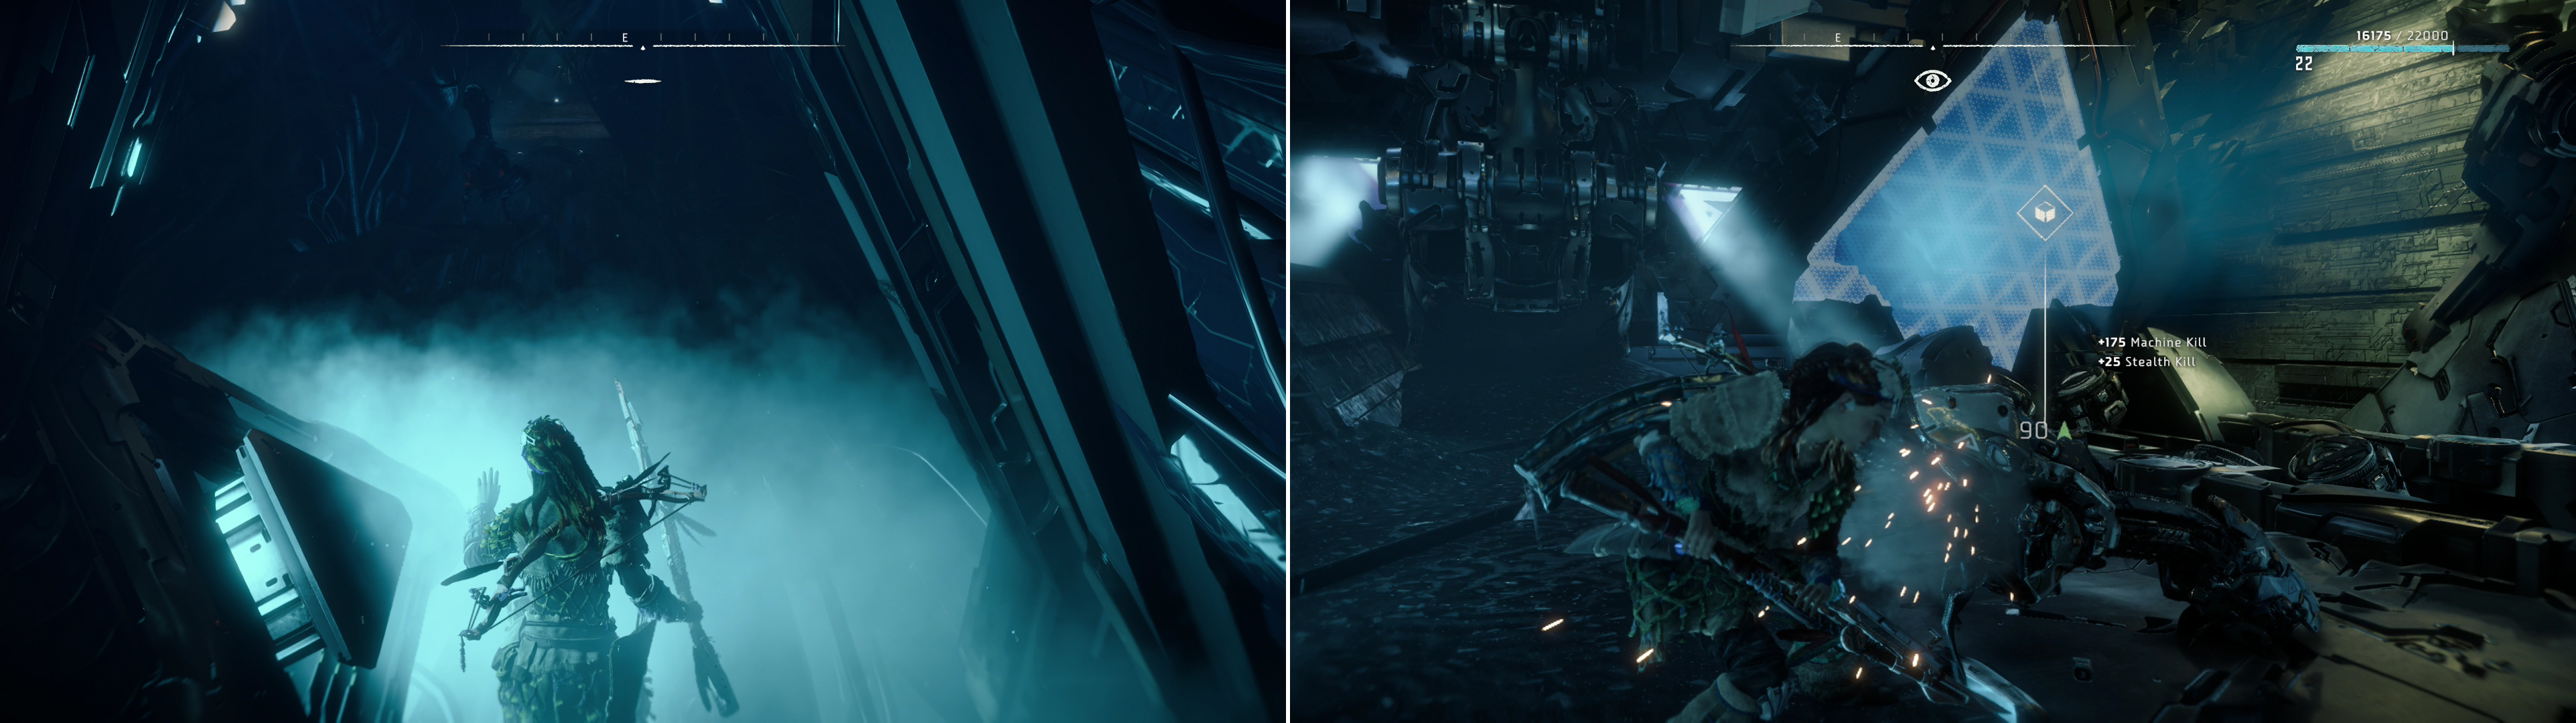 Steam vents will provide cover for you in Cauldron SIGMA (left), which you can use to ambush the Watchers inside (right).